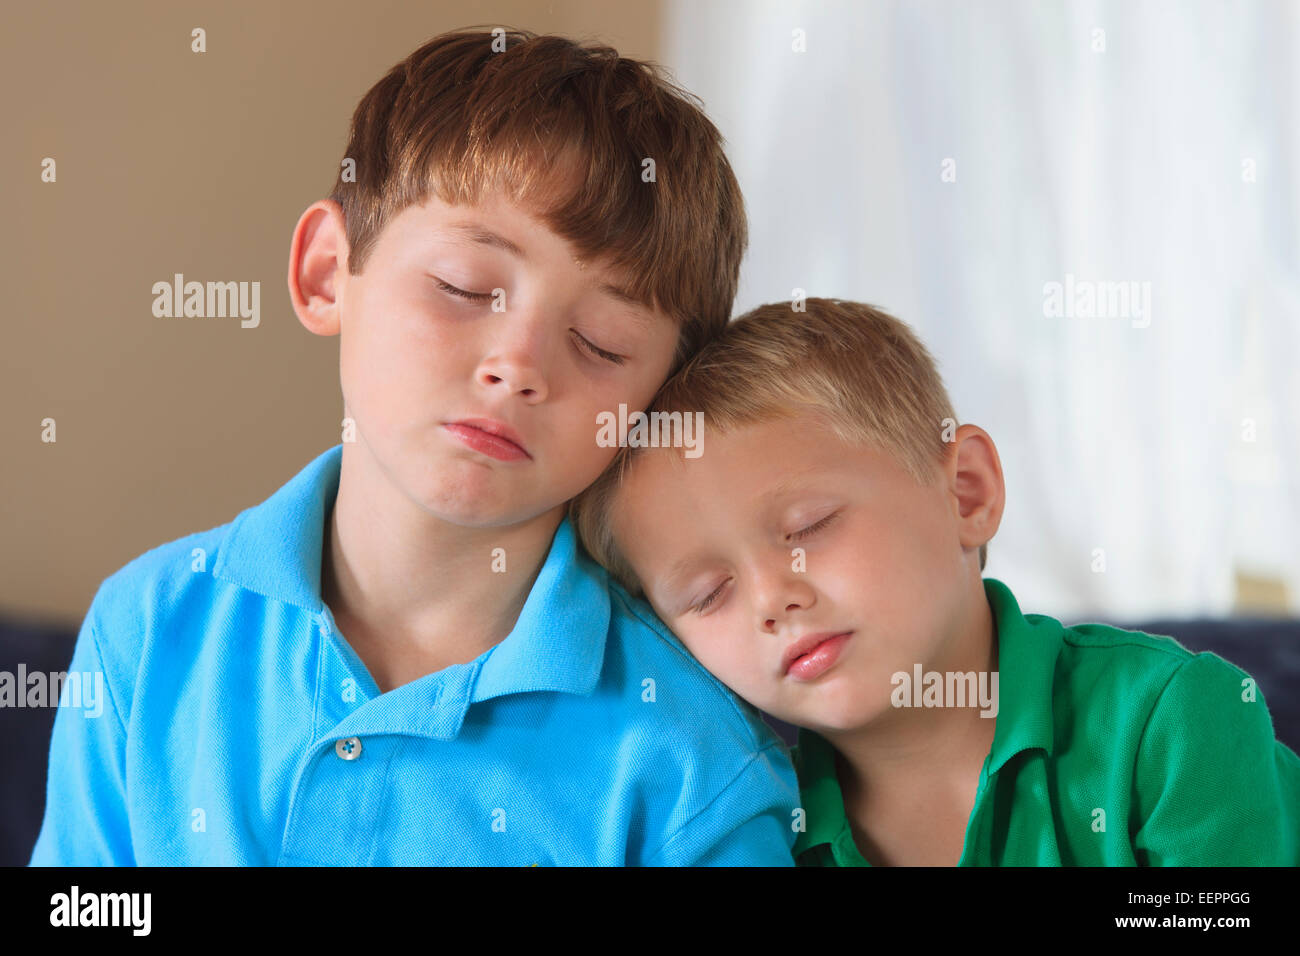 Boys with hearing impairments napping on their couch Stock Photo